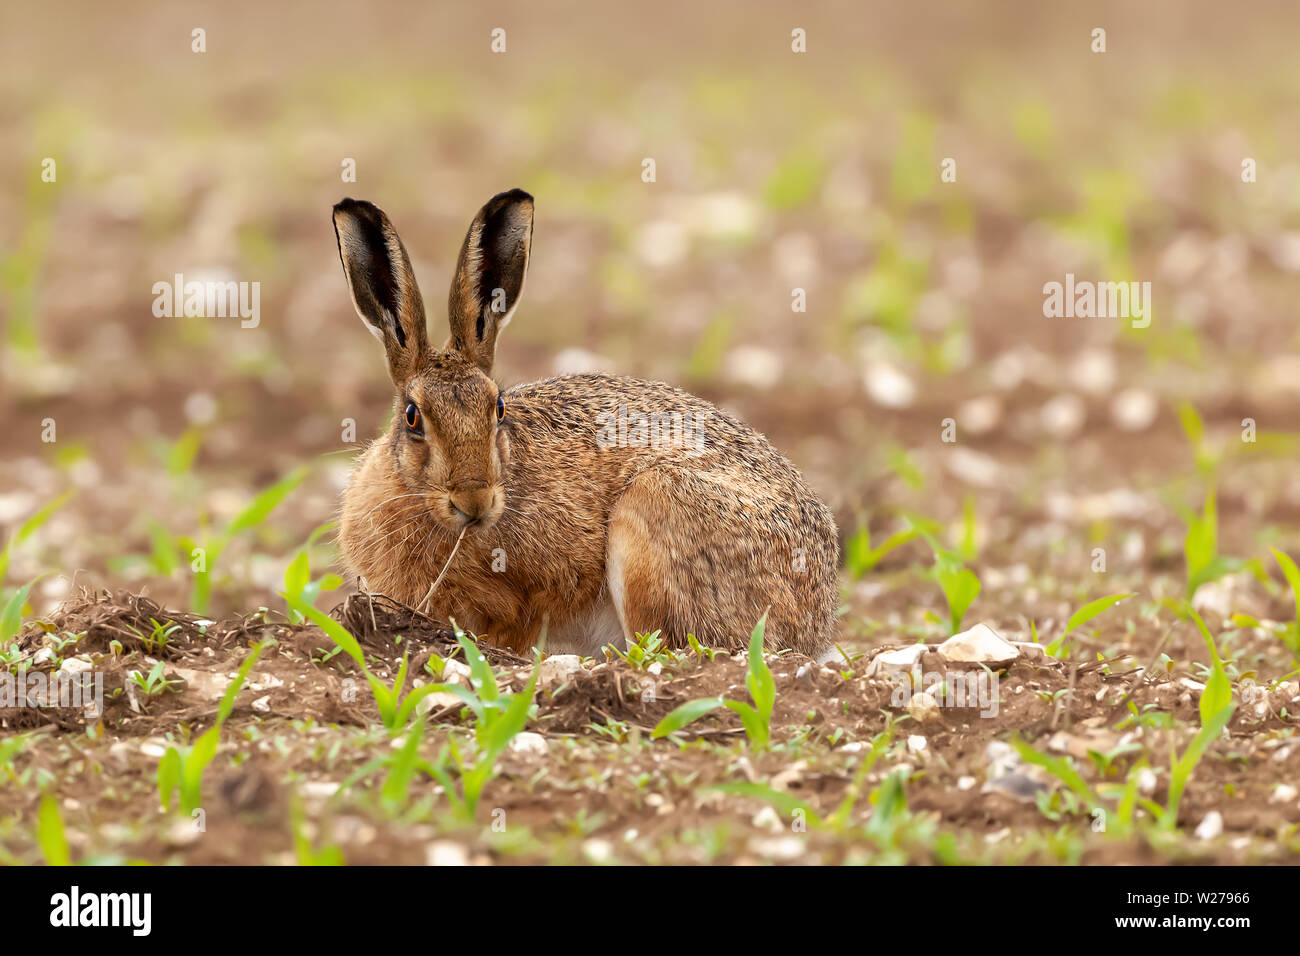 Wild brown hare laying down in amongst newly planted farm crops. Single animal close up in nature scene Stock Photo